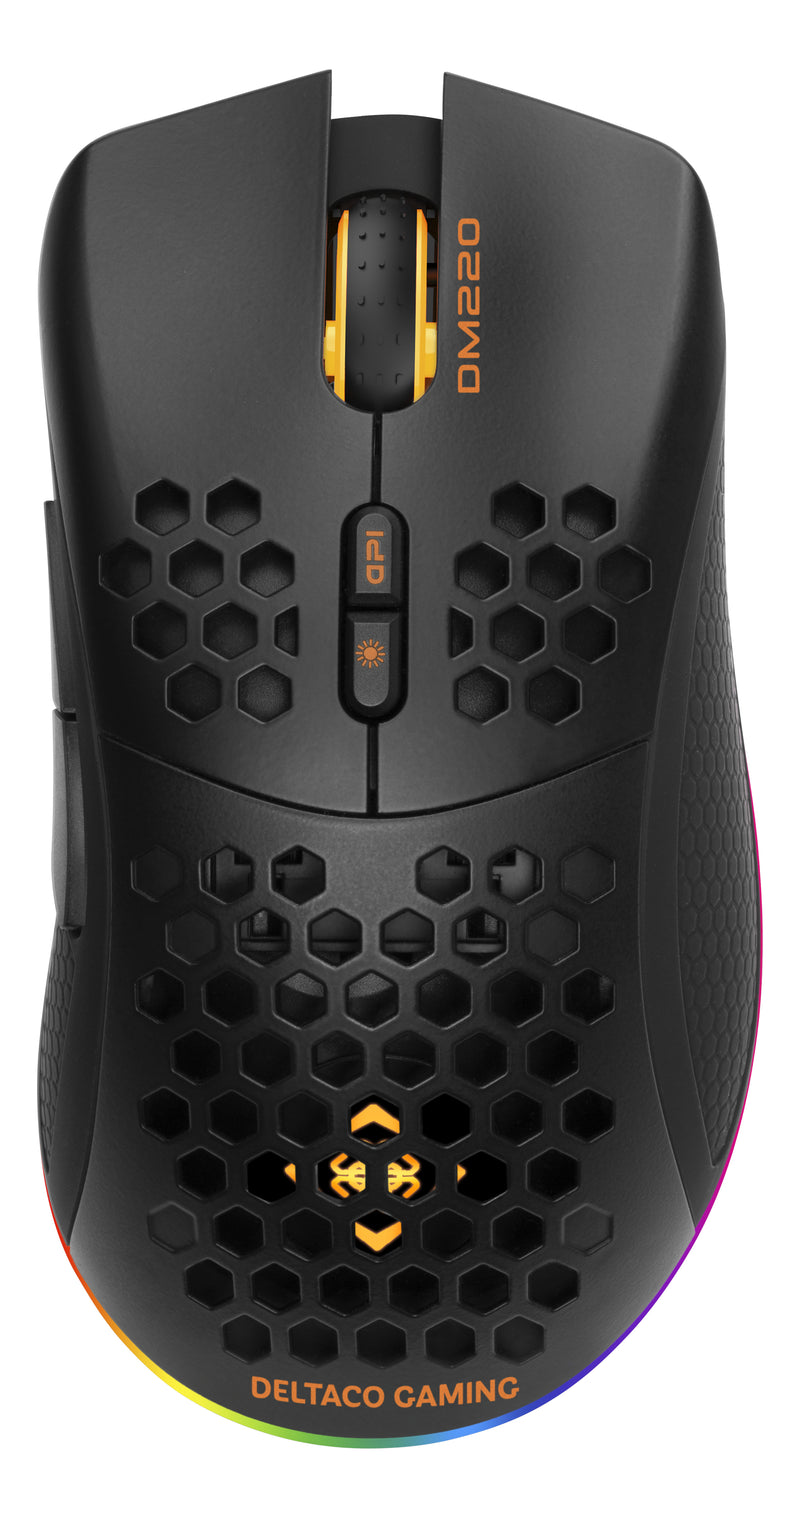 Deltaco Gaming DM220 Wireless Lightweight Gaming Mouse, RGB LED, 2.4 GHz USB